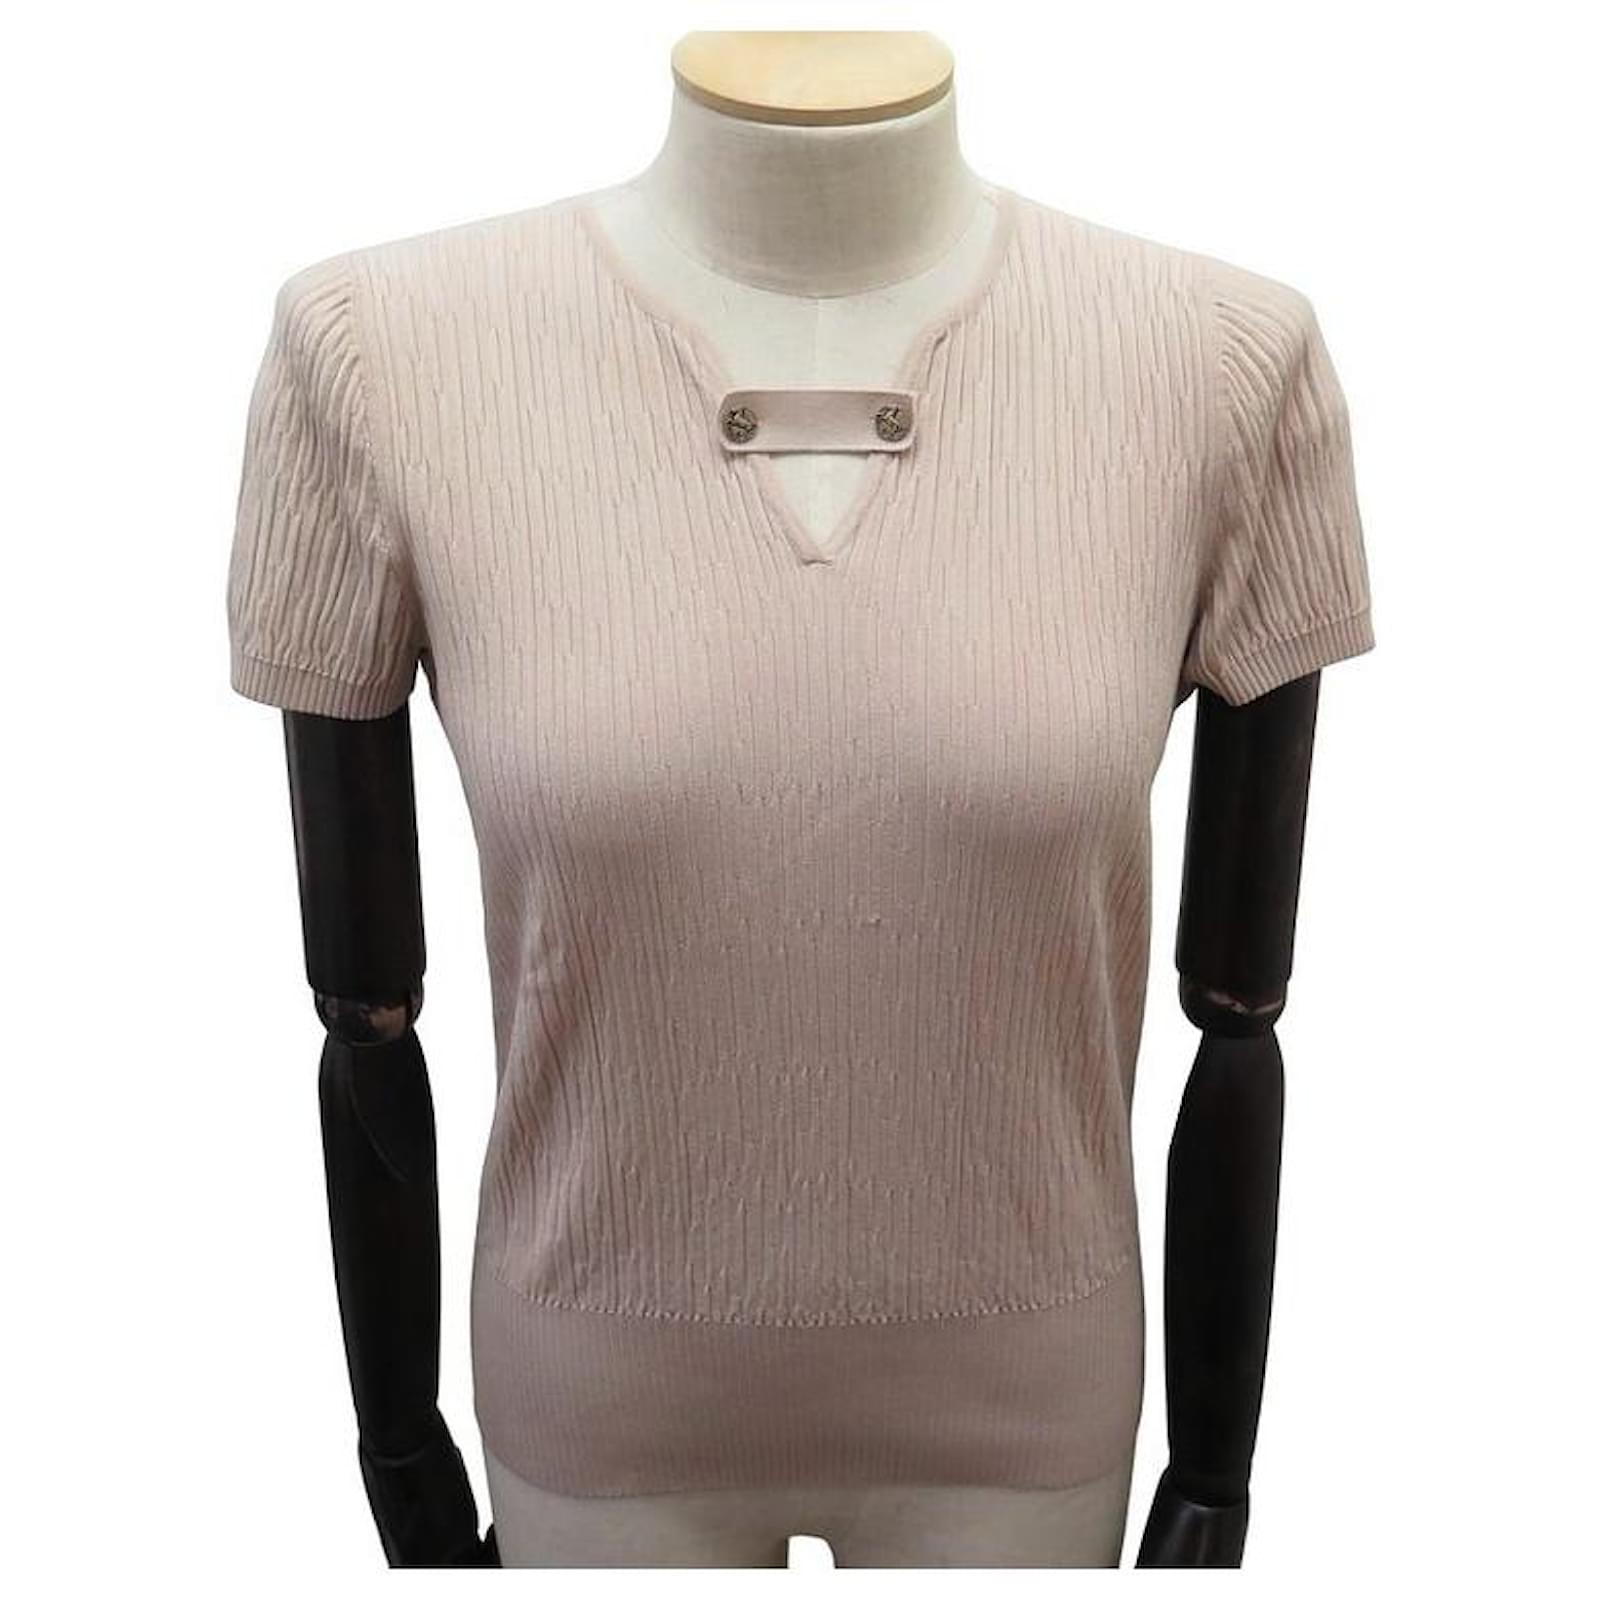 NEW CHANEL TOP RIBBED KNIT TOP P58127K07618 S 36 CUPRO PINK SHIRT